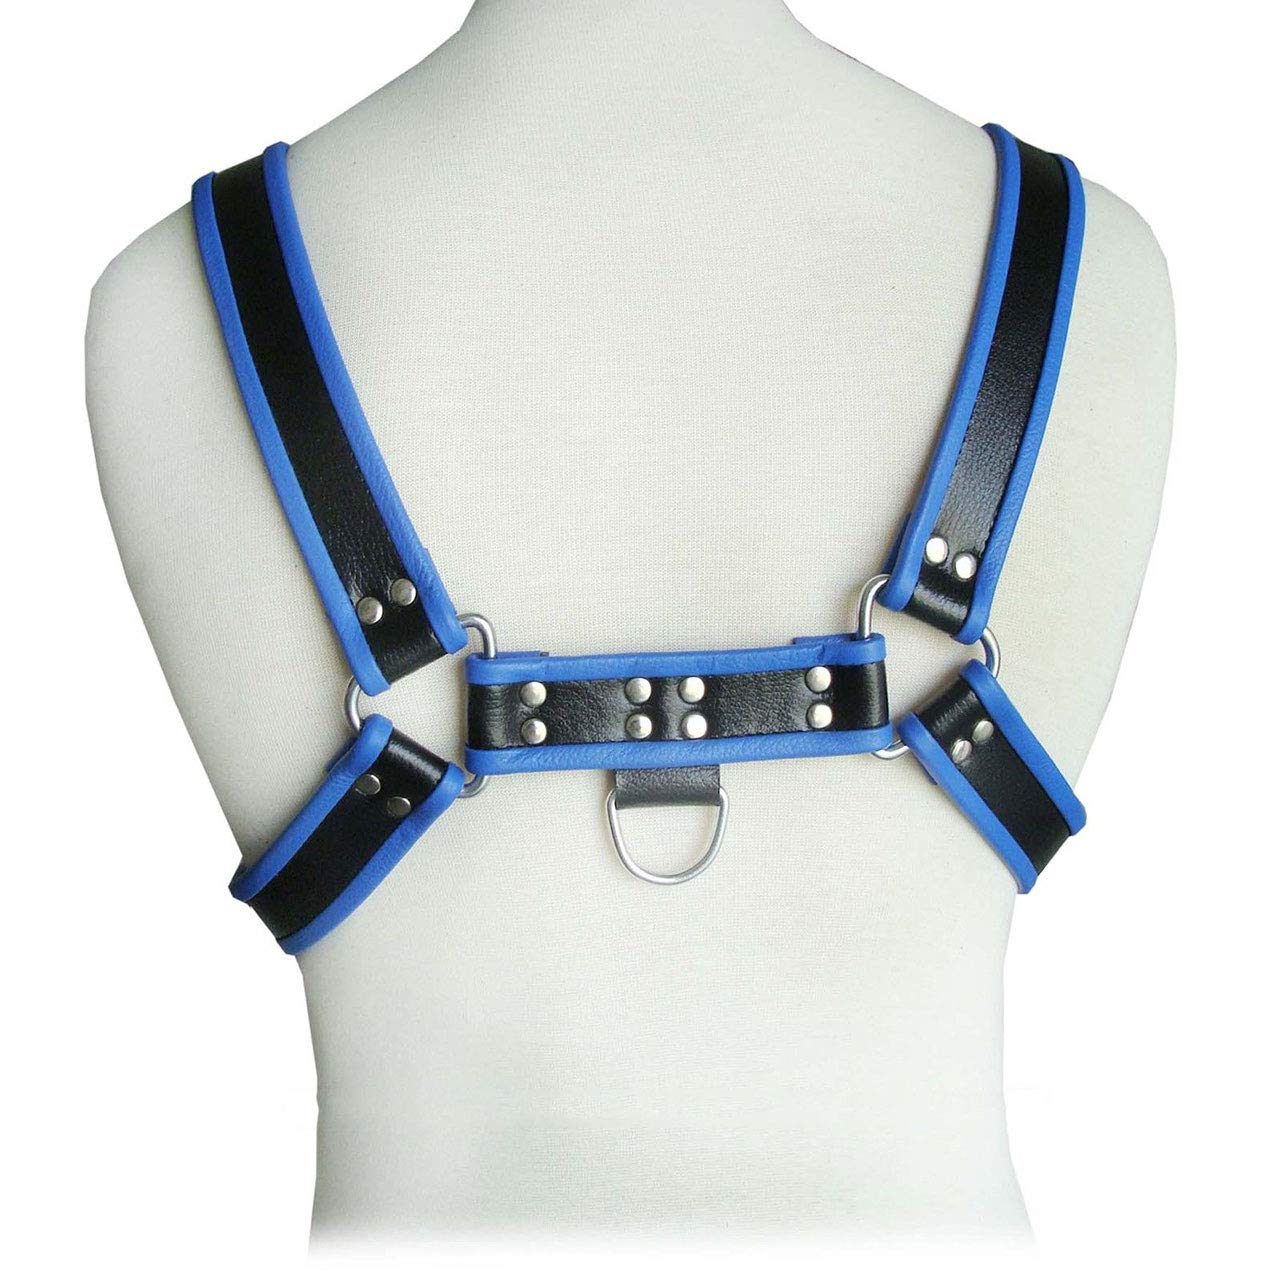 a white mannequin wearing a blue and black harness